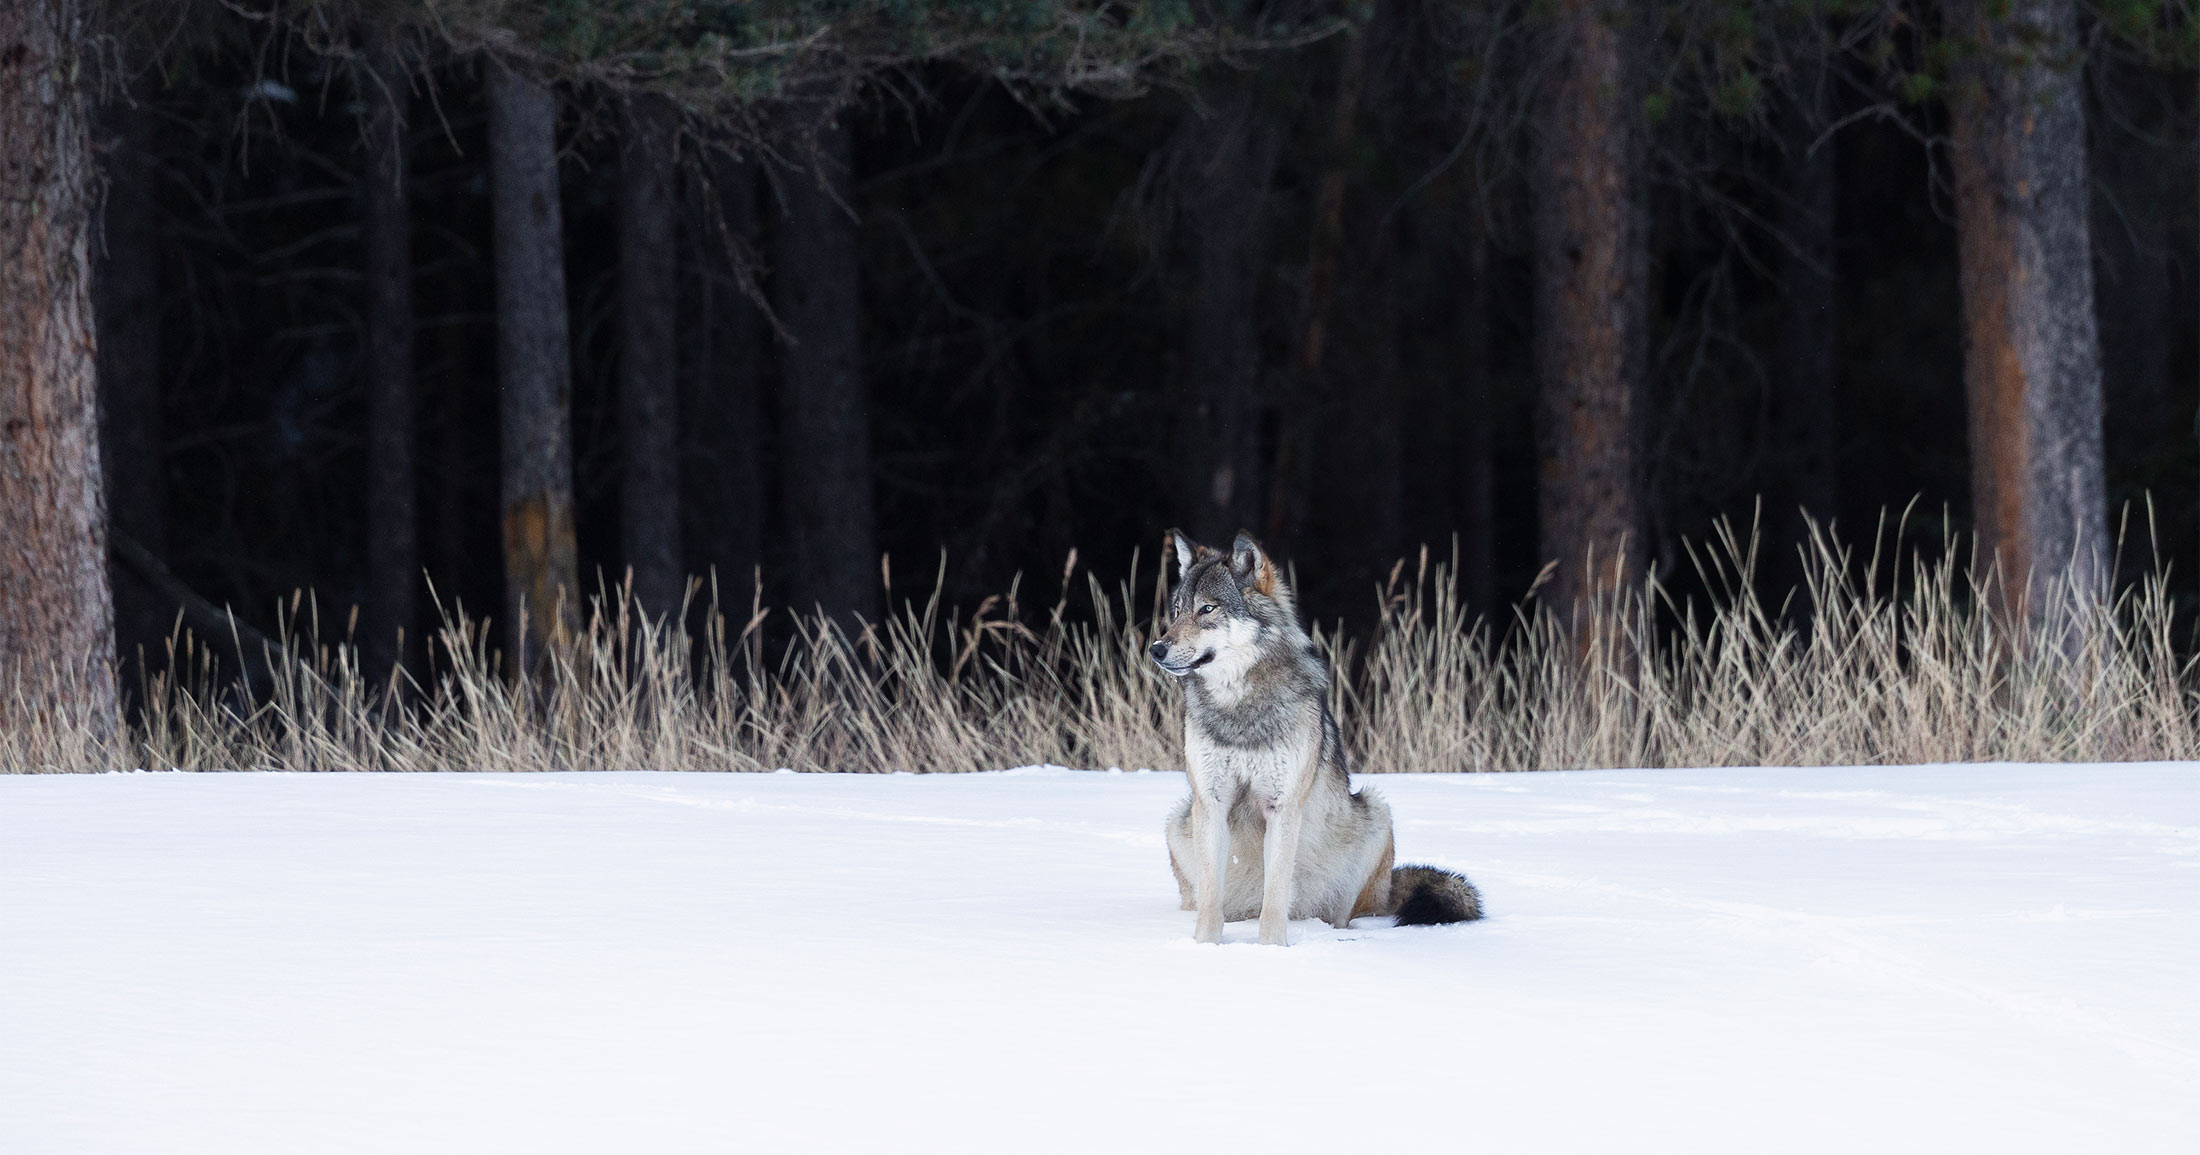 Wolf standing in snow.